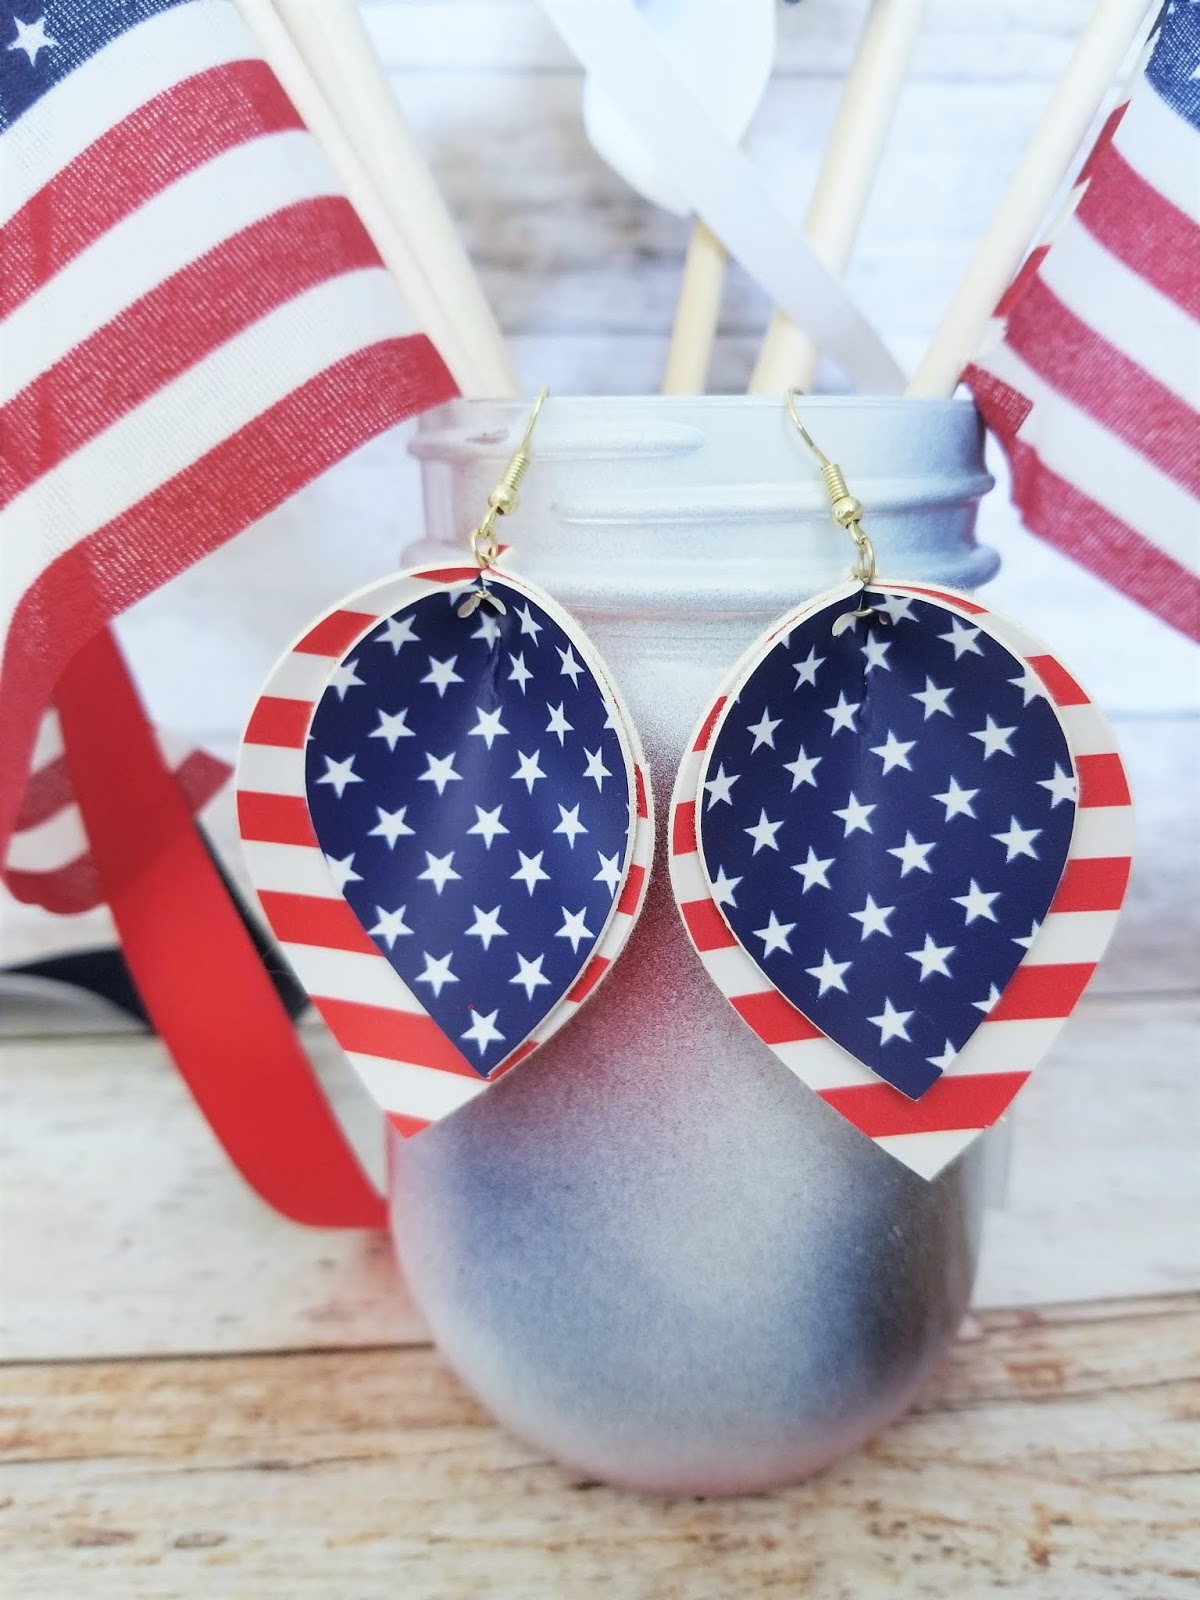 Download Spectacular And Free Patriotic Earring Cut Files Sew Simple Home PSD Mockup Templates